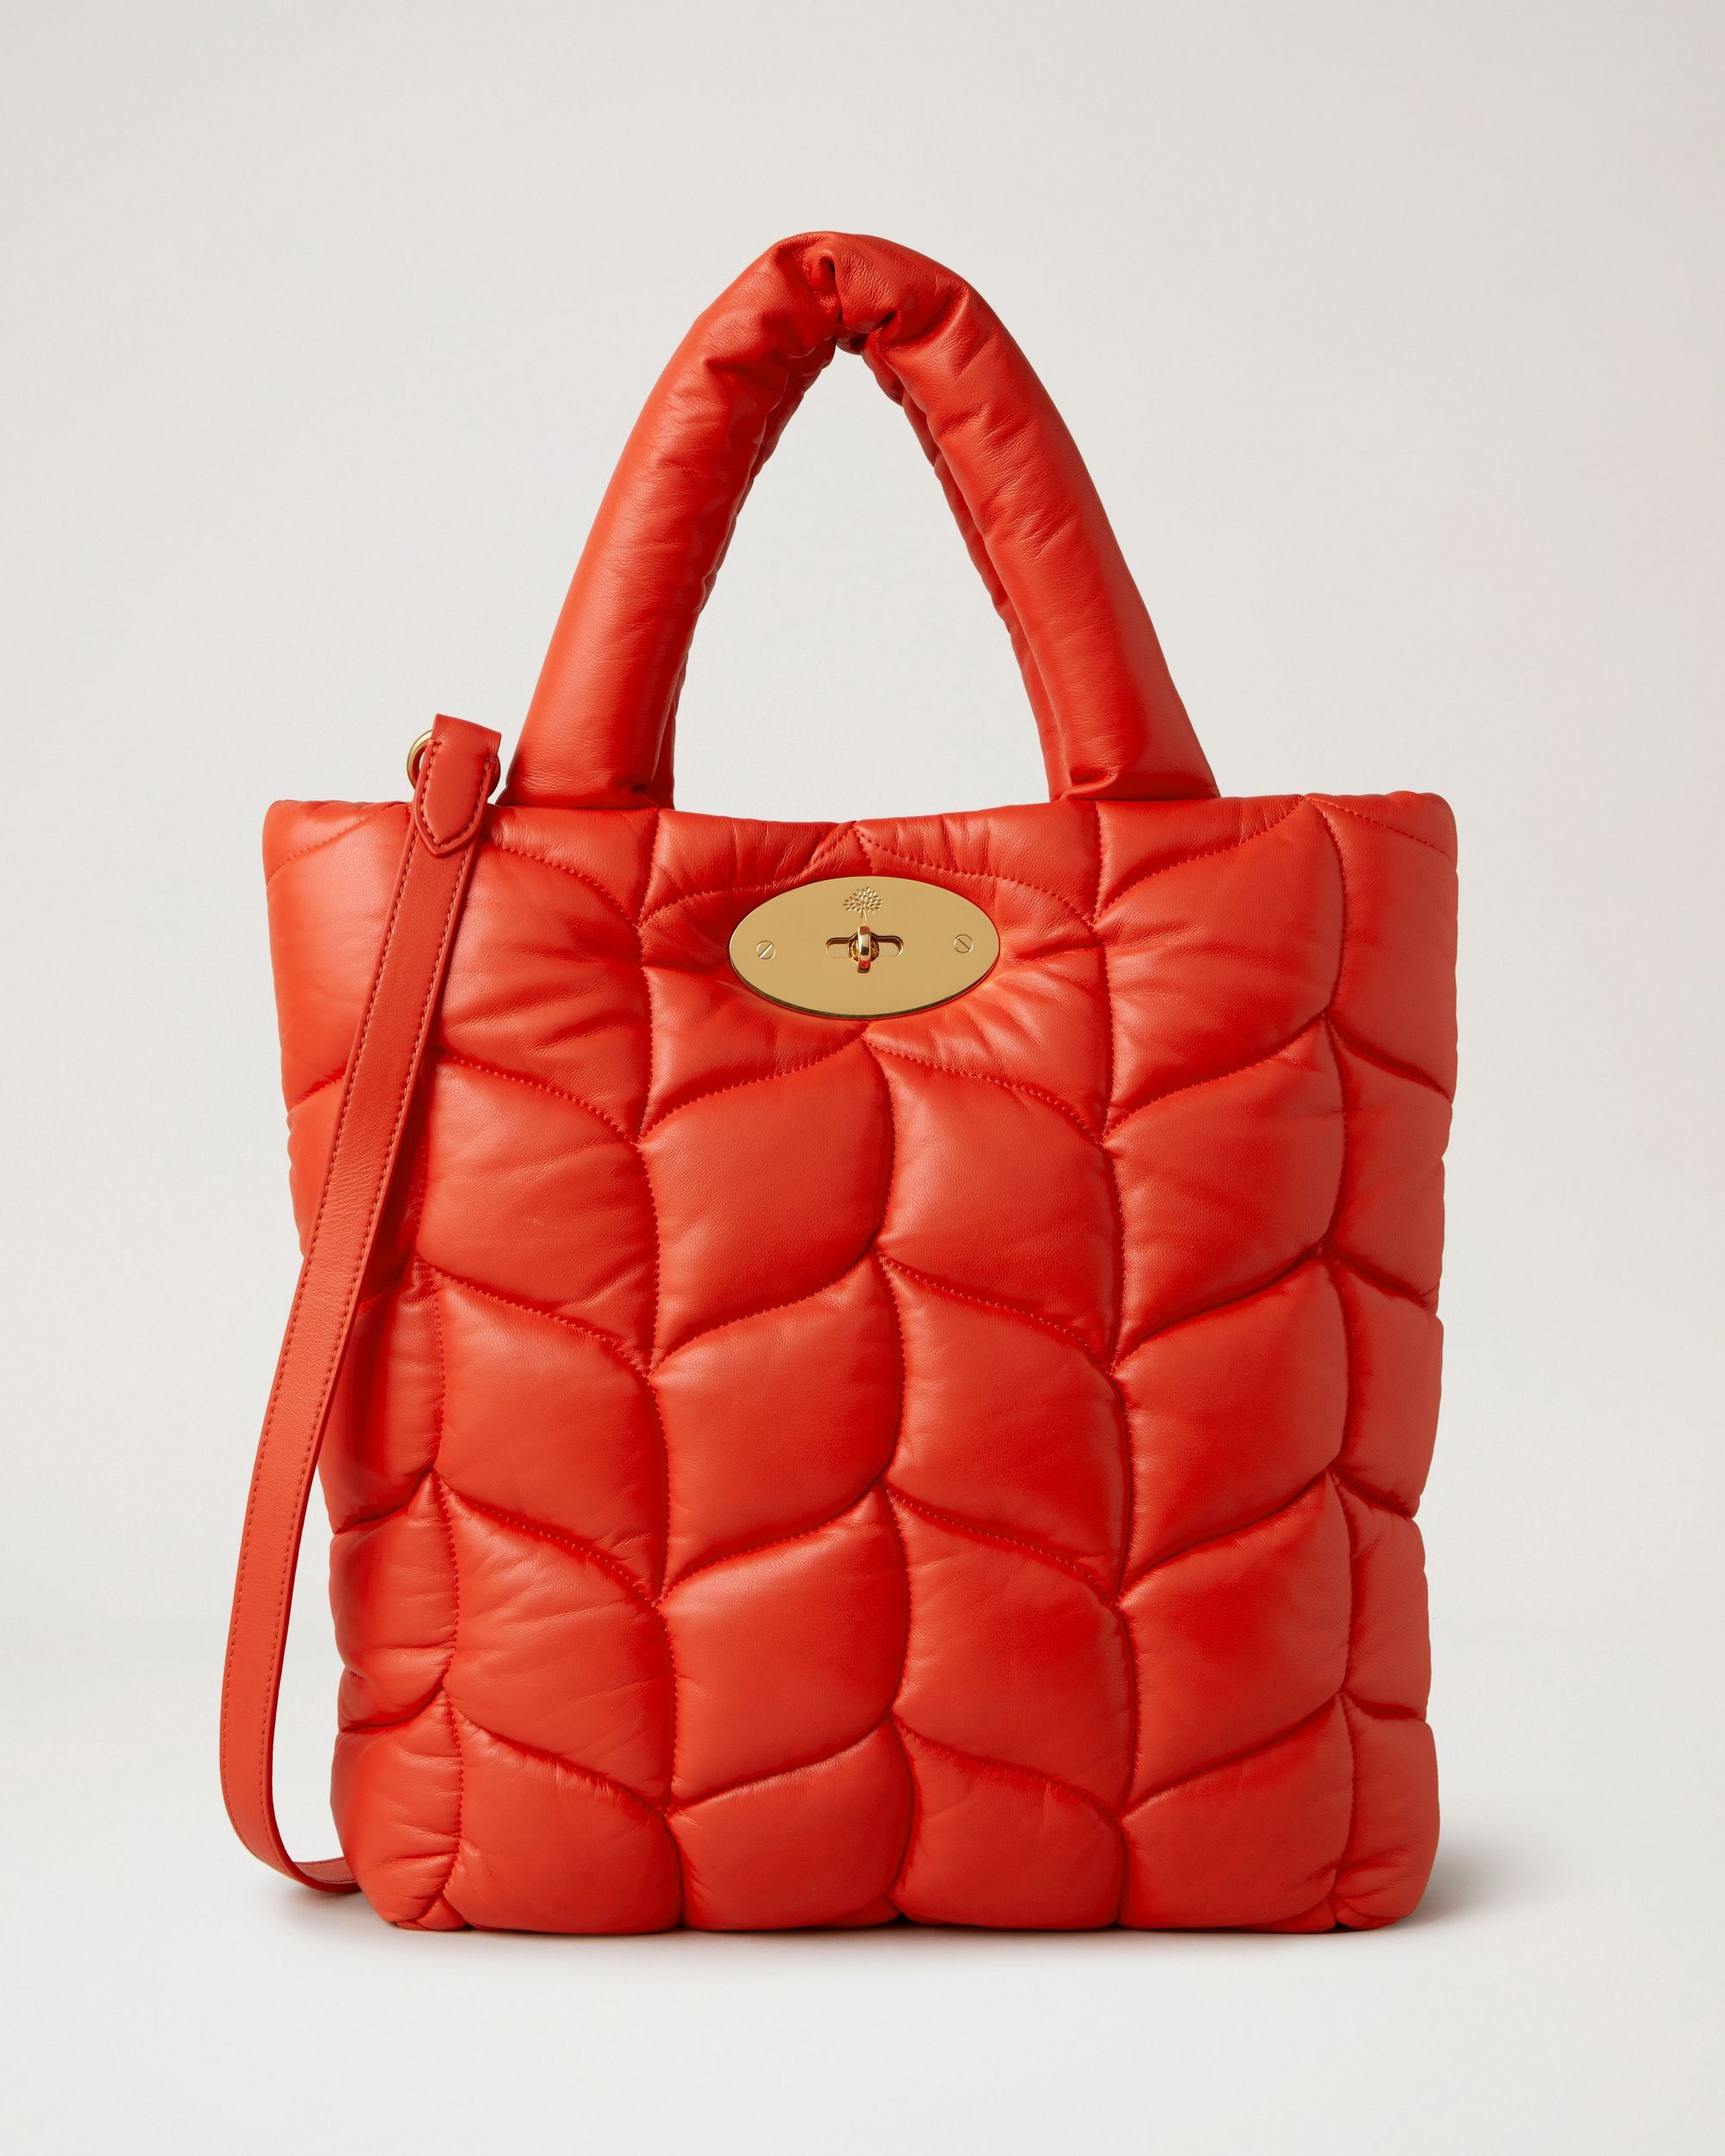 Red luxury tote bag